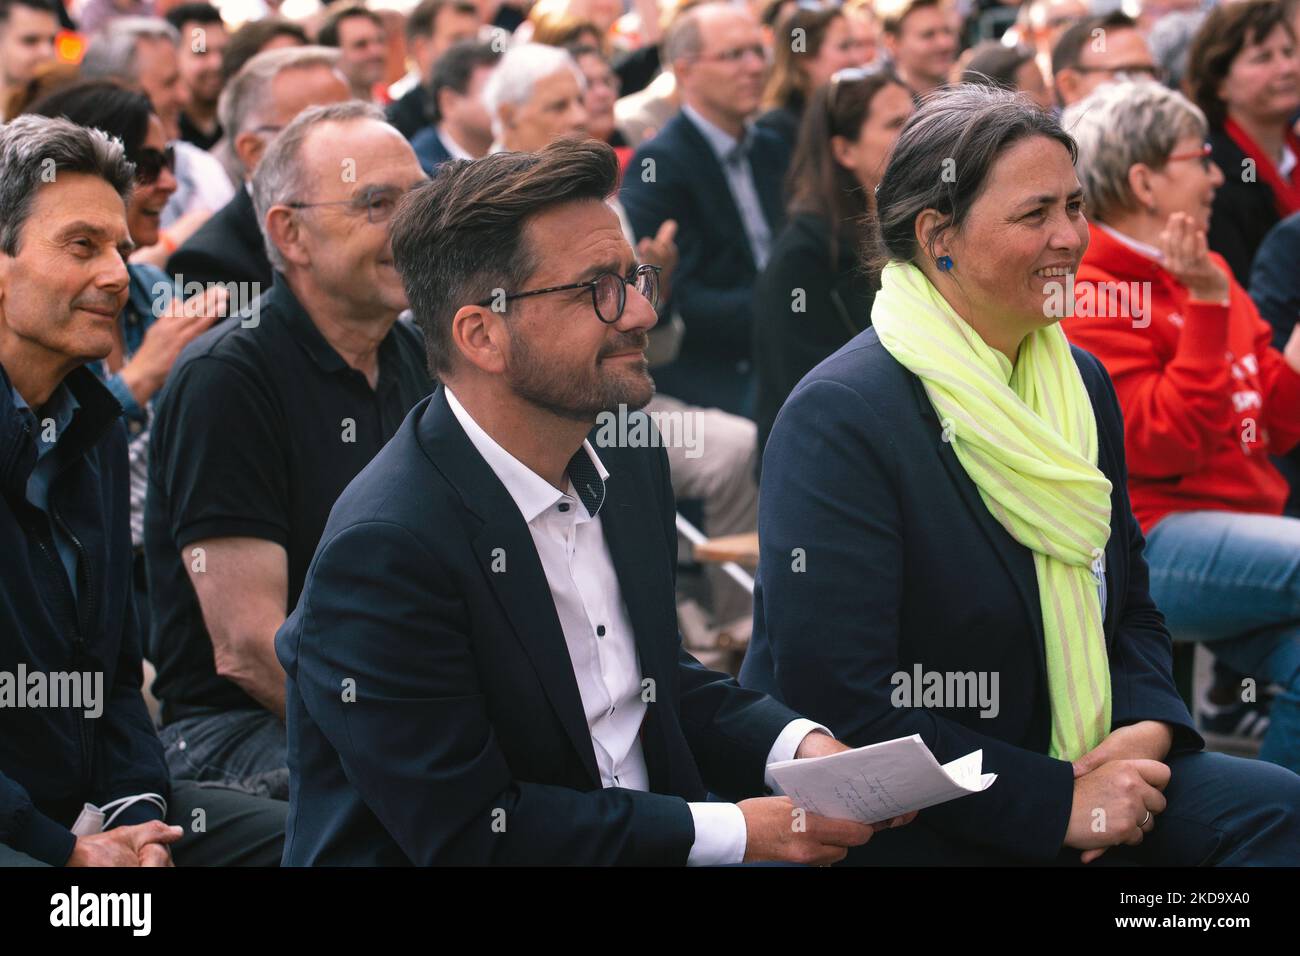 Thomas Kutschaty, the top candidate for SPD party is seen at Roncalliplatz in Cologne, Germany on May 13 during the SPD party state election campaign 2022 (Photo by Ying Tang/NurPhoto) Stock Photo